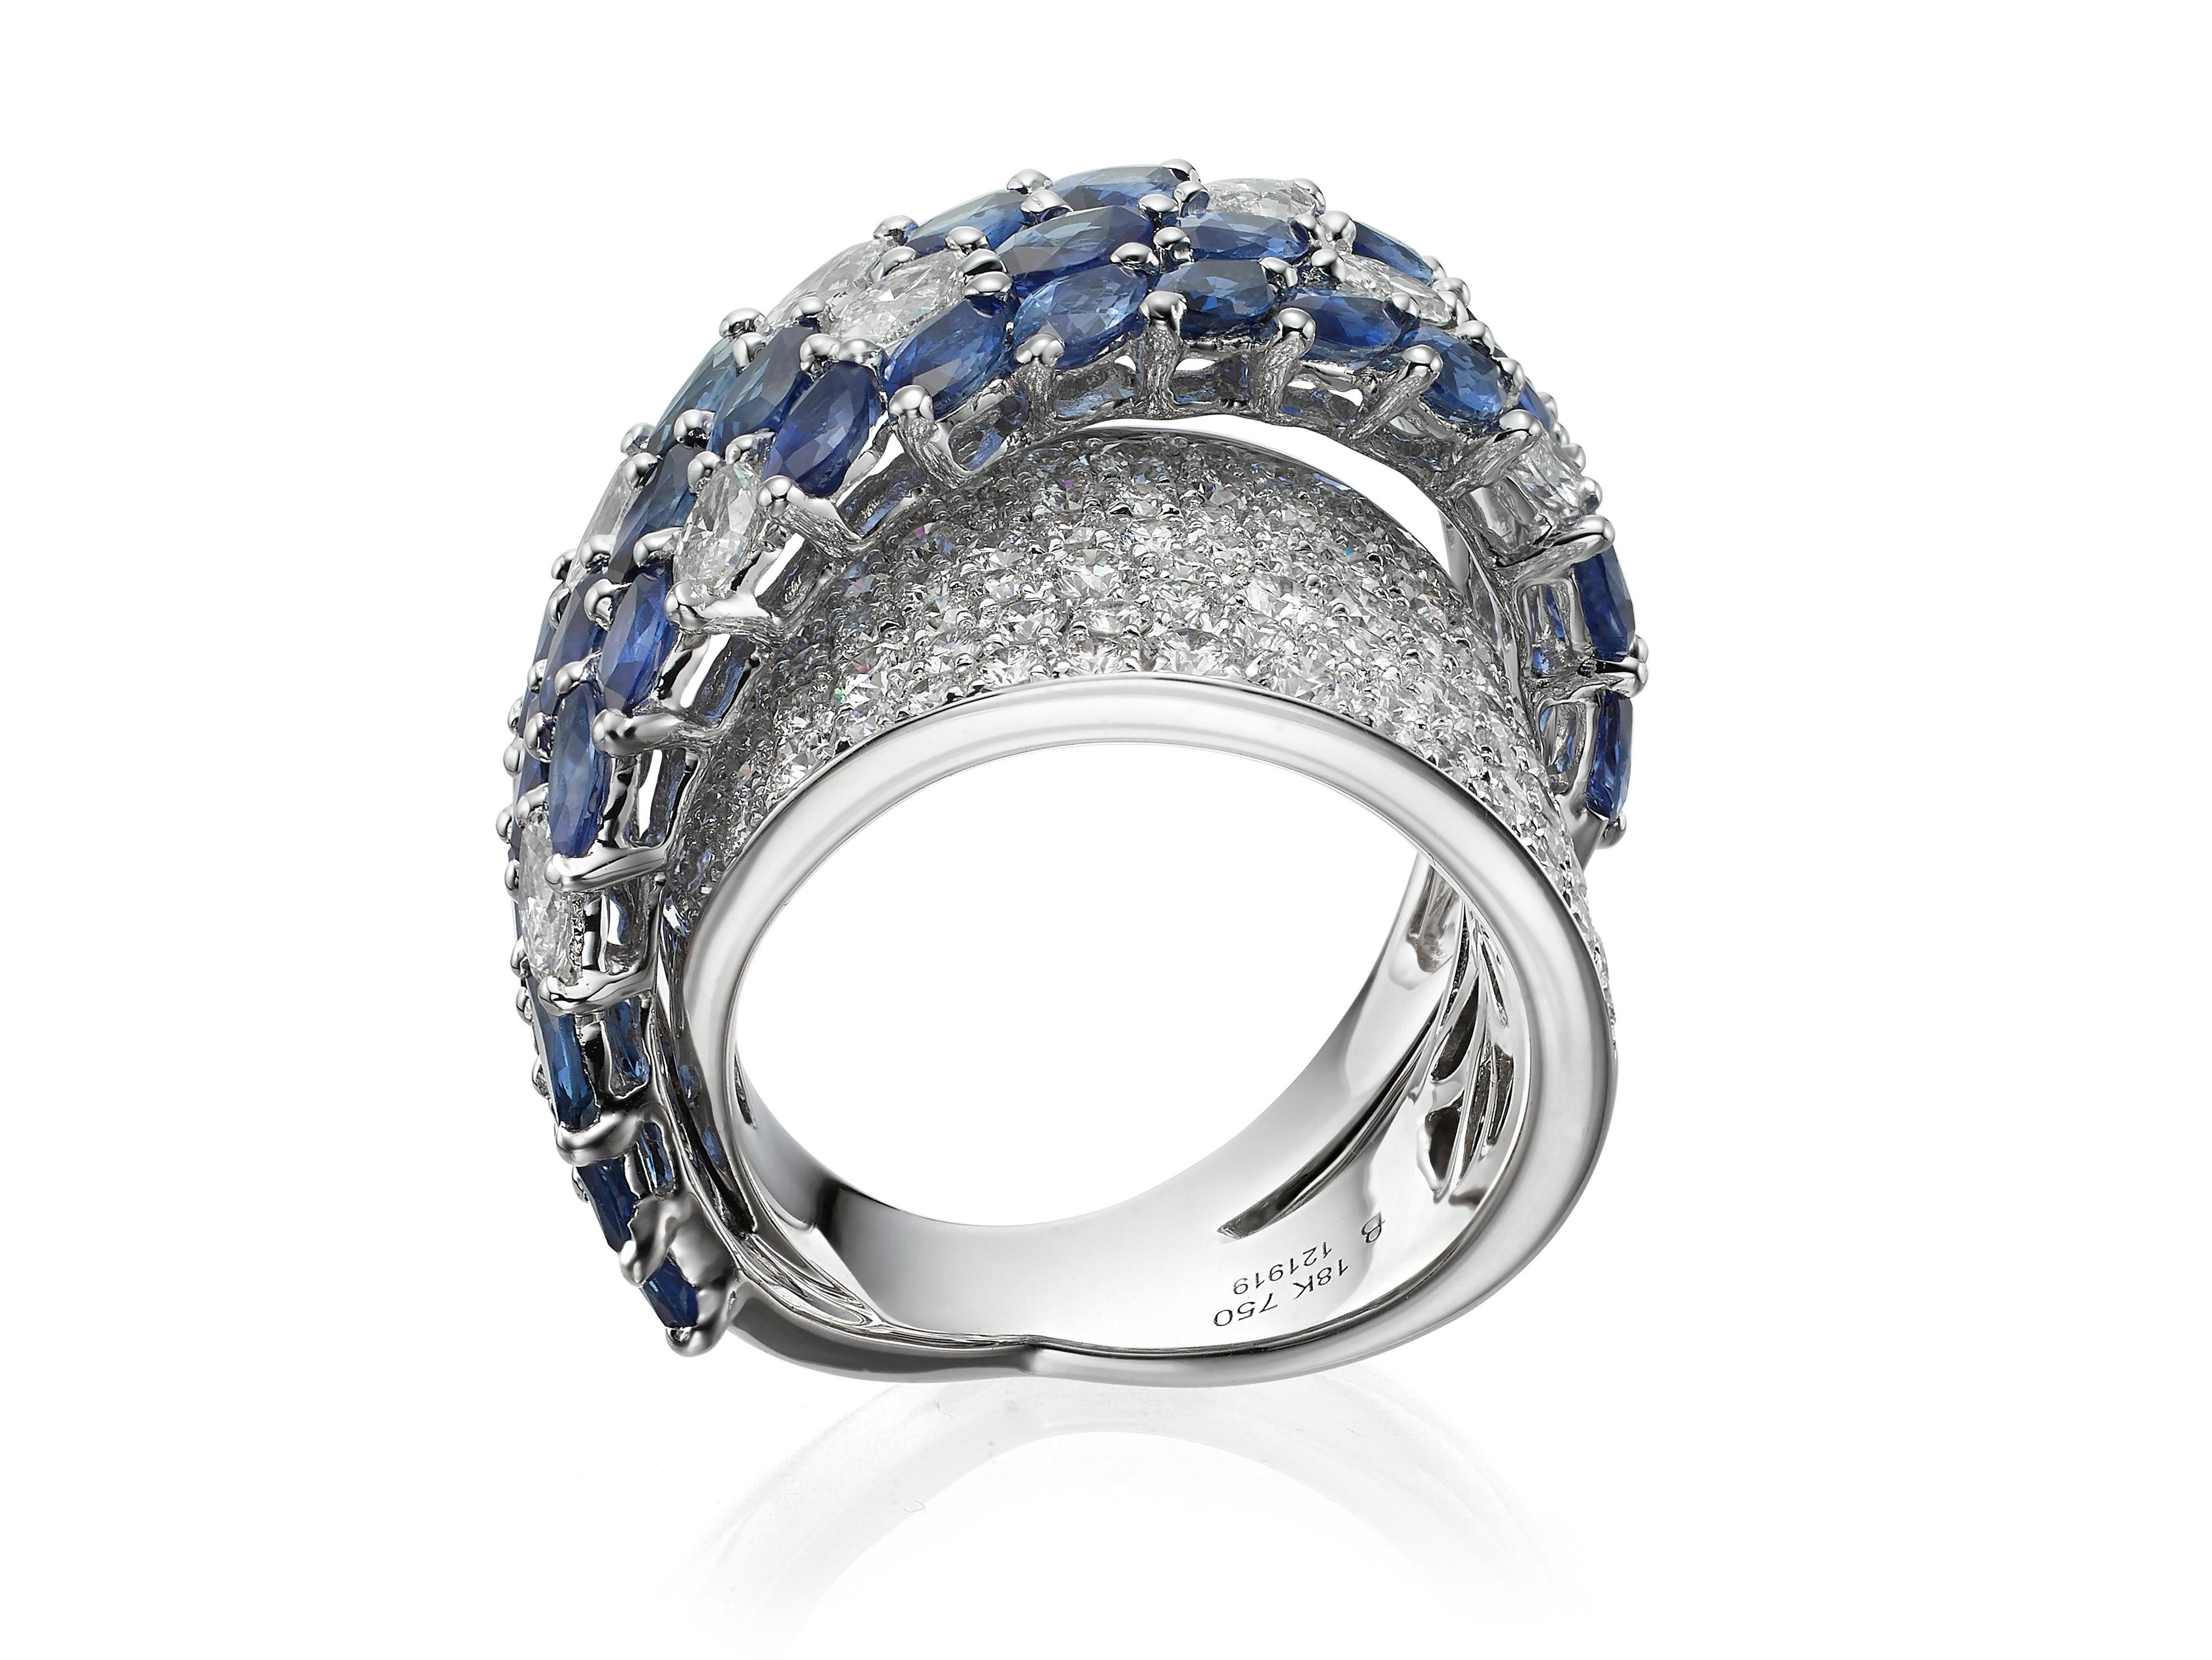 Exquisite elegance.  Royal blue sapphires contrast with the stunning brilliance of diamonds in this crossover cocktail ring.  Hand-crafted in 18K white gold, the ring features 3.06 carats of round and marquise shape diamonds  and 5.96 carats of